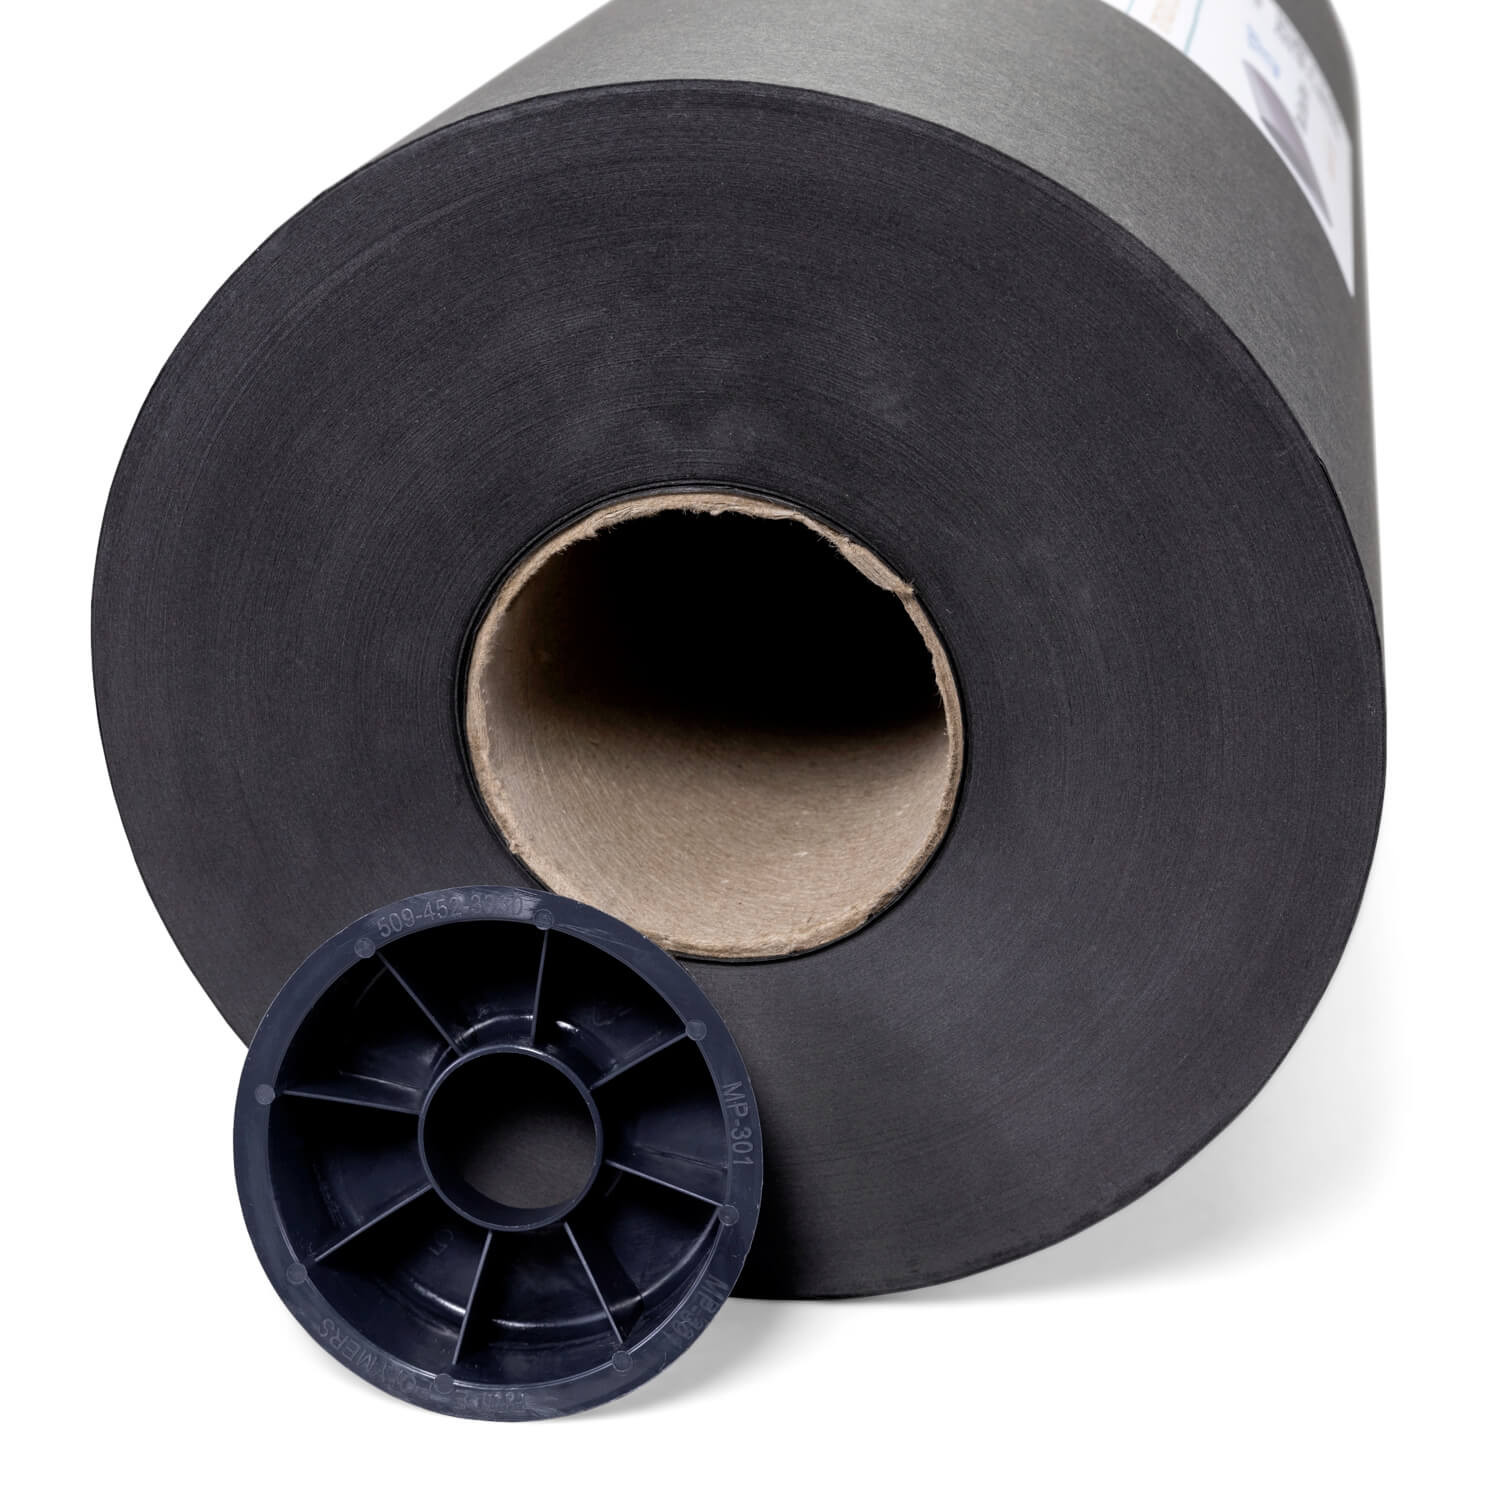  IDL Packaging 18 x 180' Black Steak Paper Roll - Great  Experience for Meat Display - Butcher Paper for Packing or Serving Food -  Unwaxed, Uncoated, Moisture Resistant Kraft Wrapping Paper 